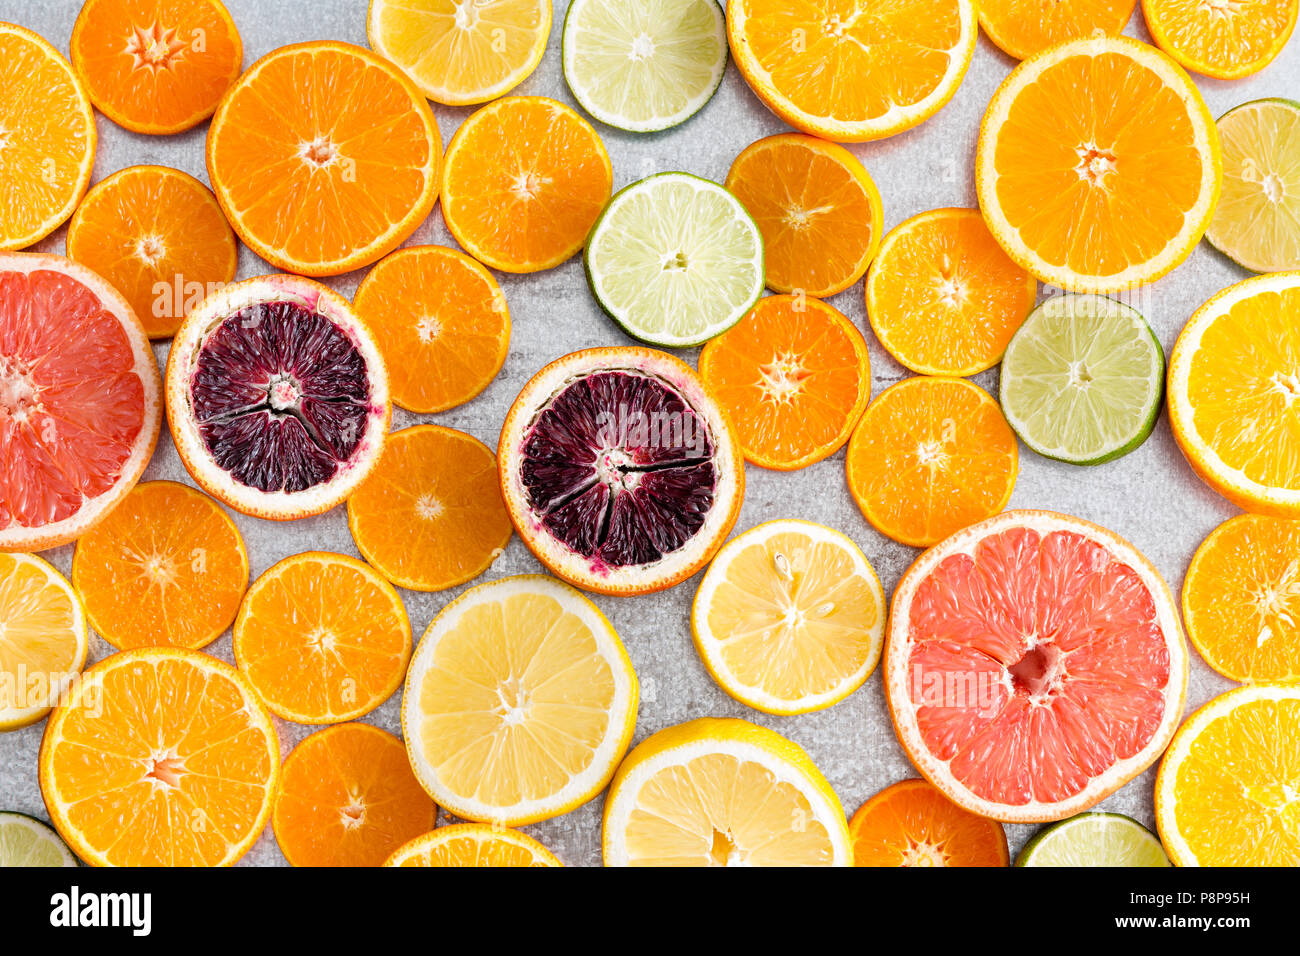 Colorful fresh cut citrus fruit background with a large assortment of halved different fruits showing the juicy pulp in a full frame view Stock Photo